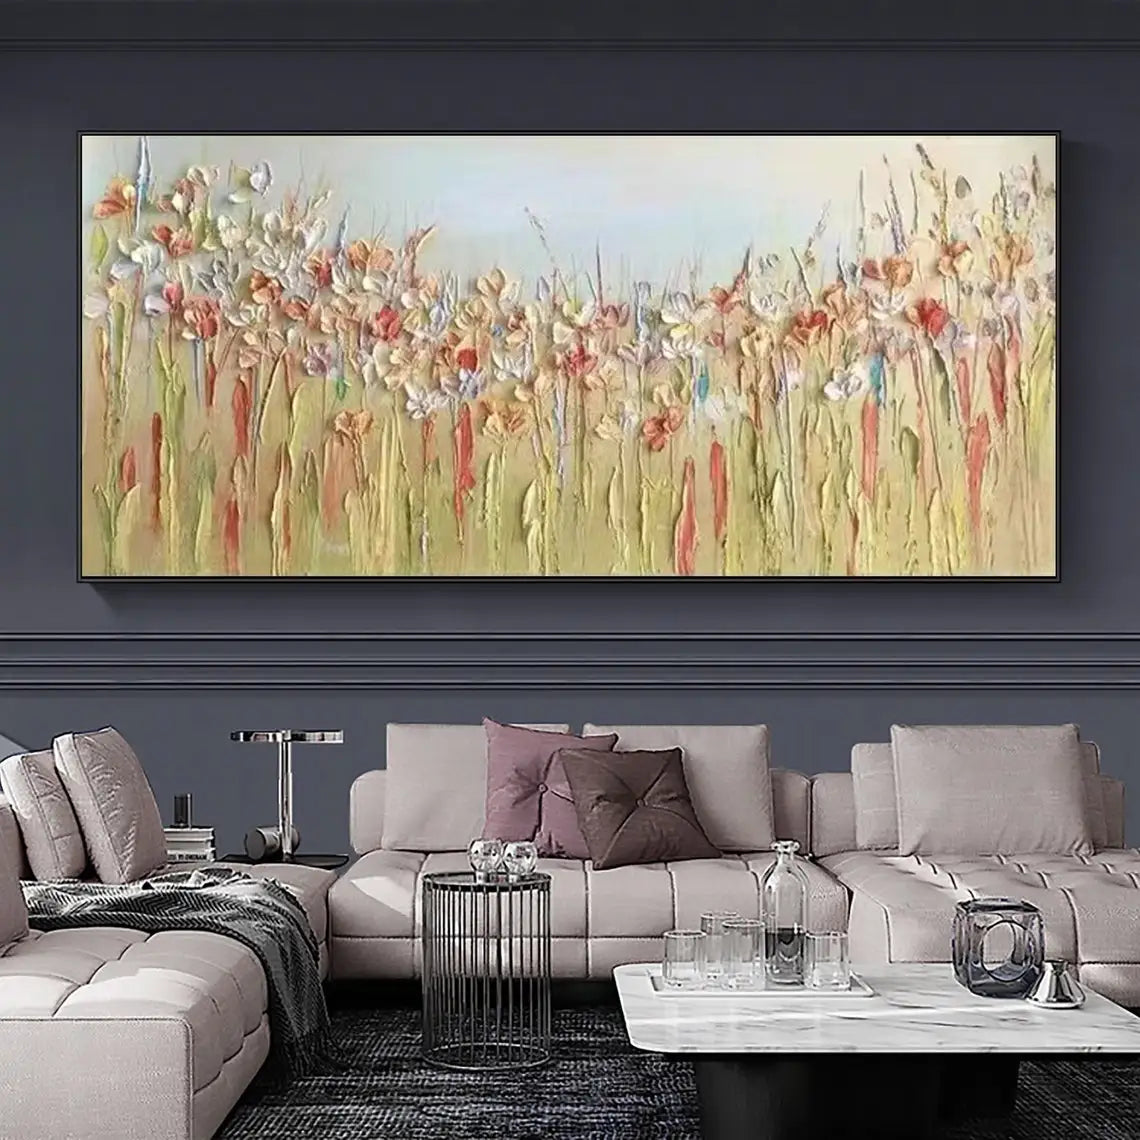 3D Textured Field of Wildflowers Stunning Painting